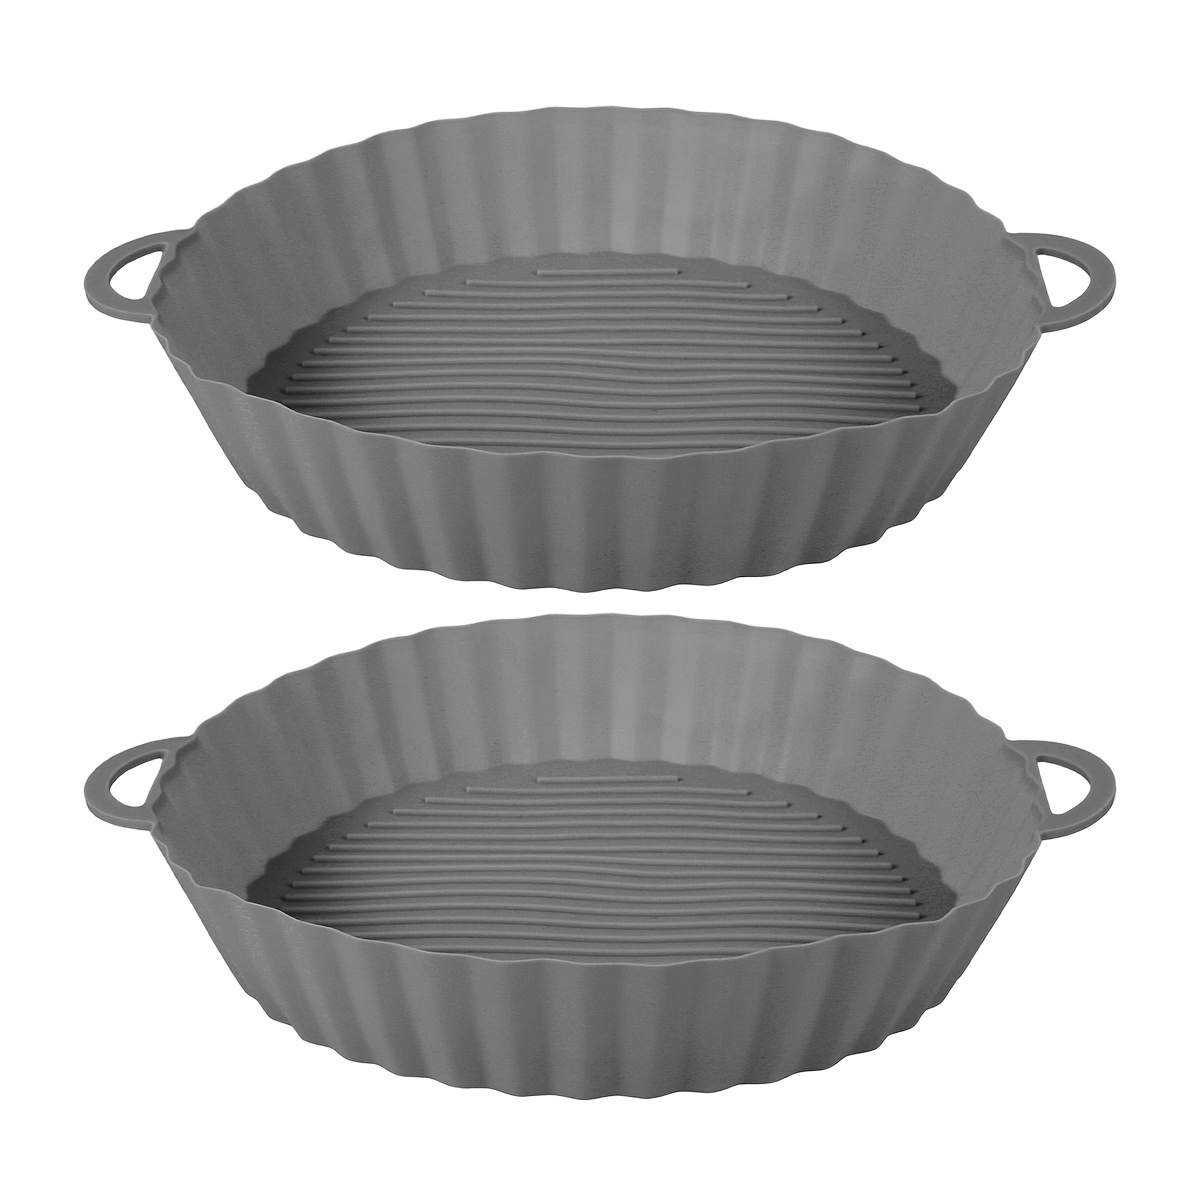 2x Silicone Pot for Air Fryer Dual Basket Liner Handle Baking Pan Fit for  Ninja